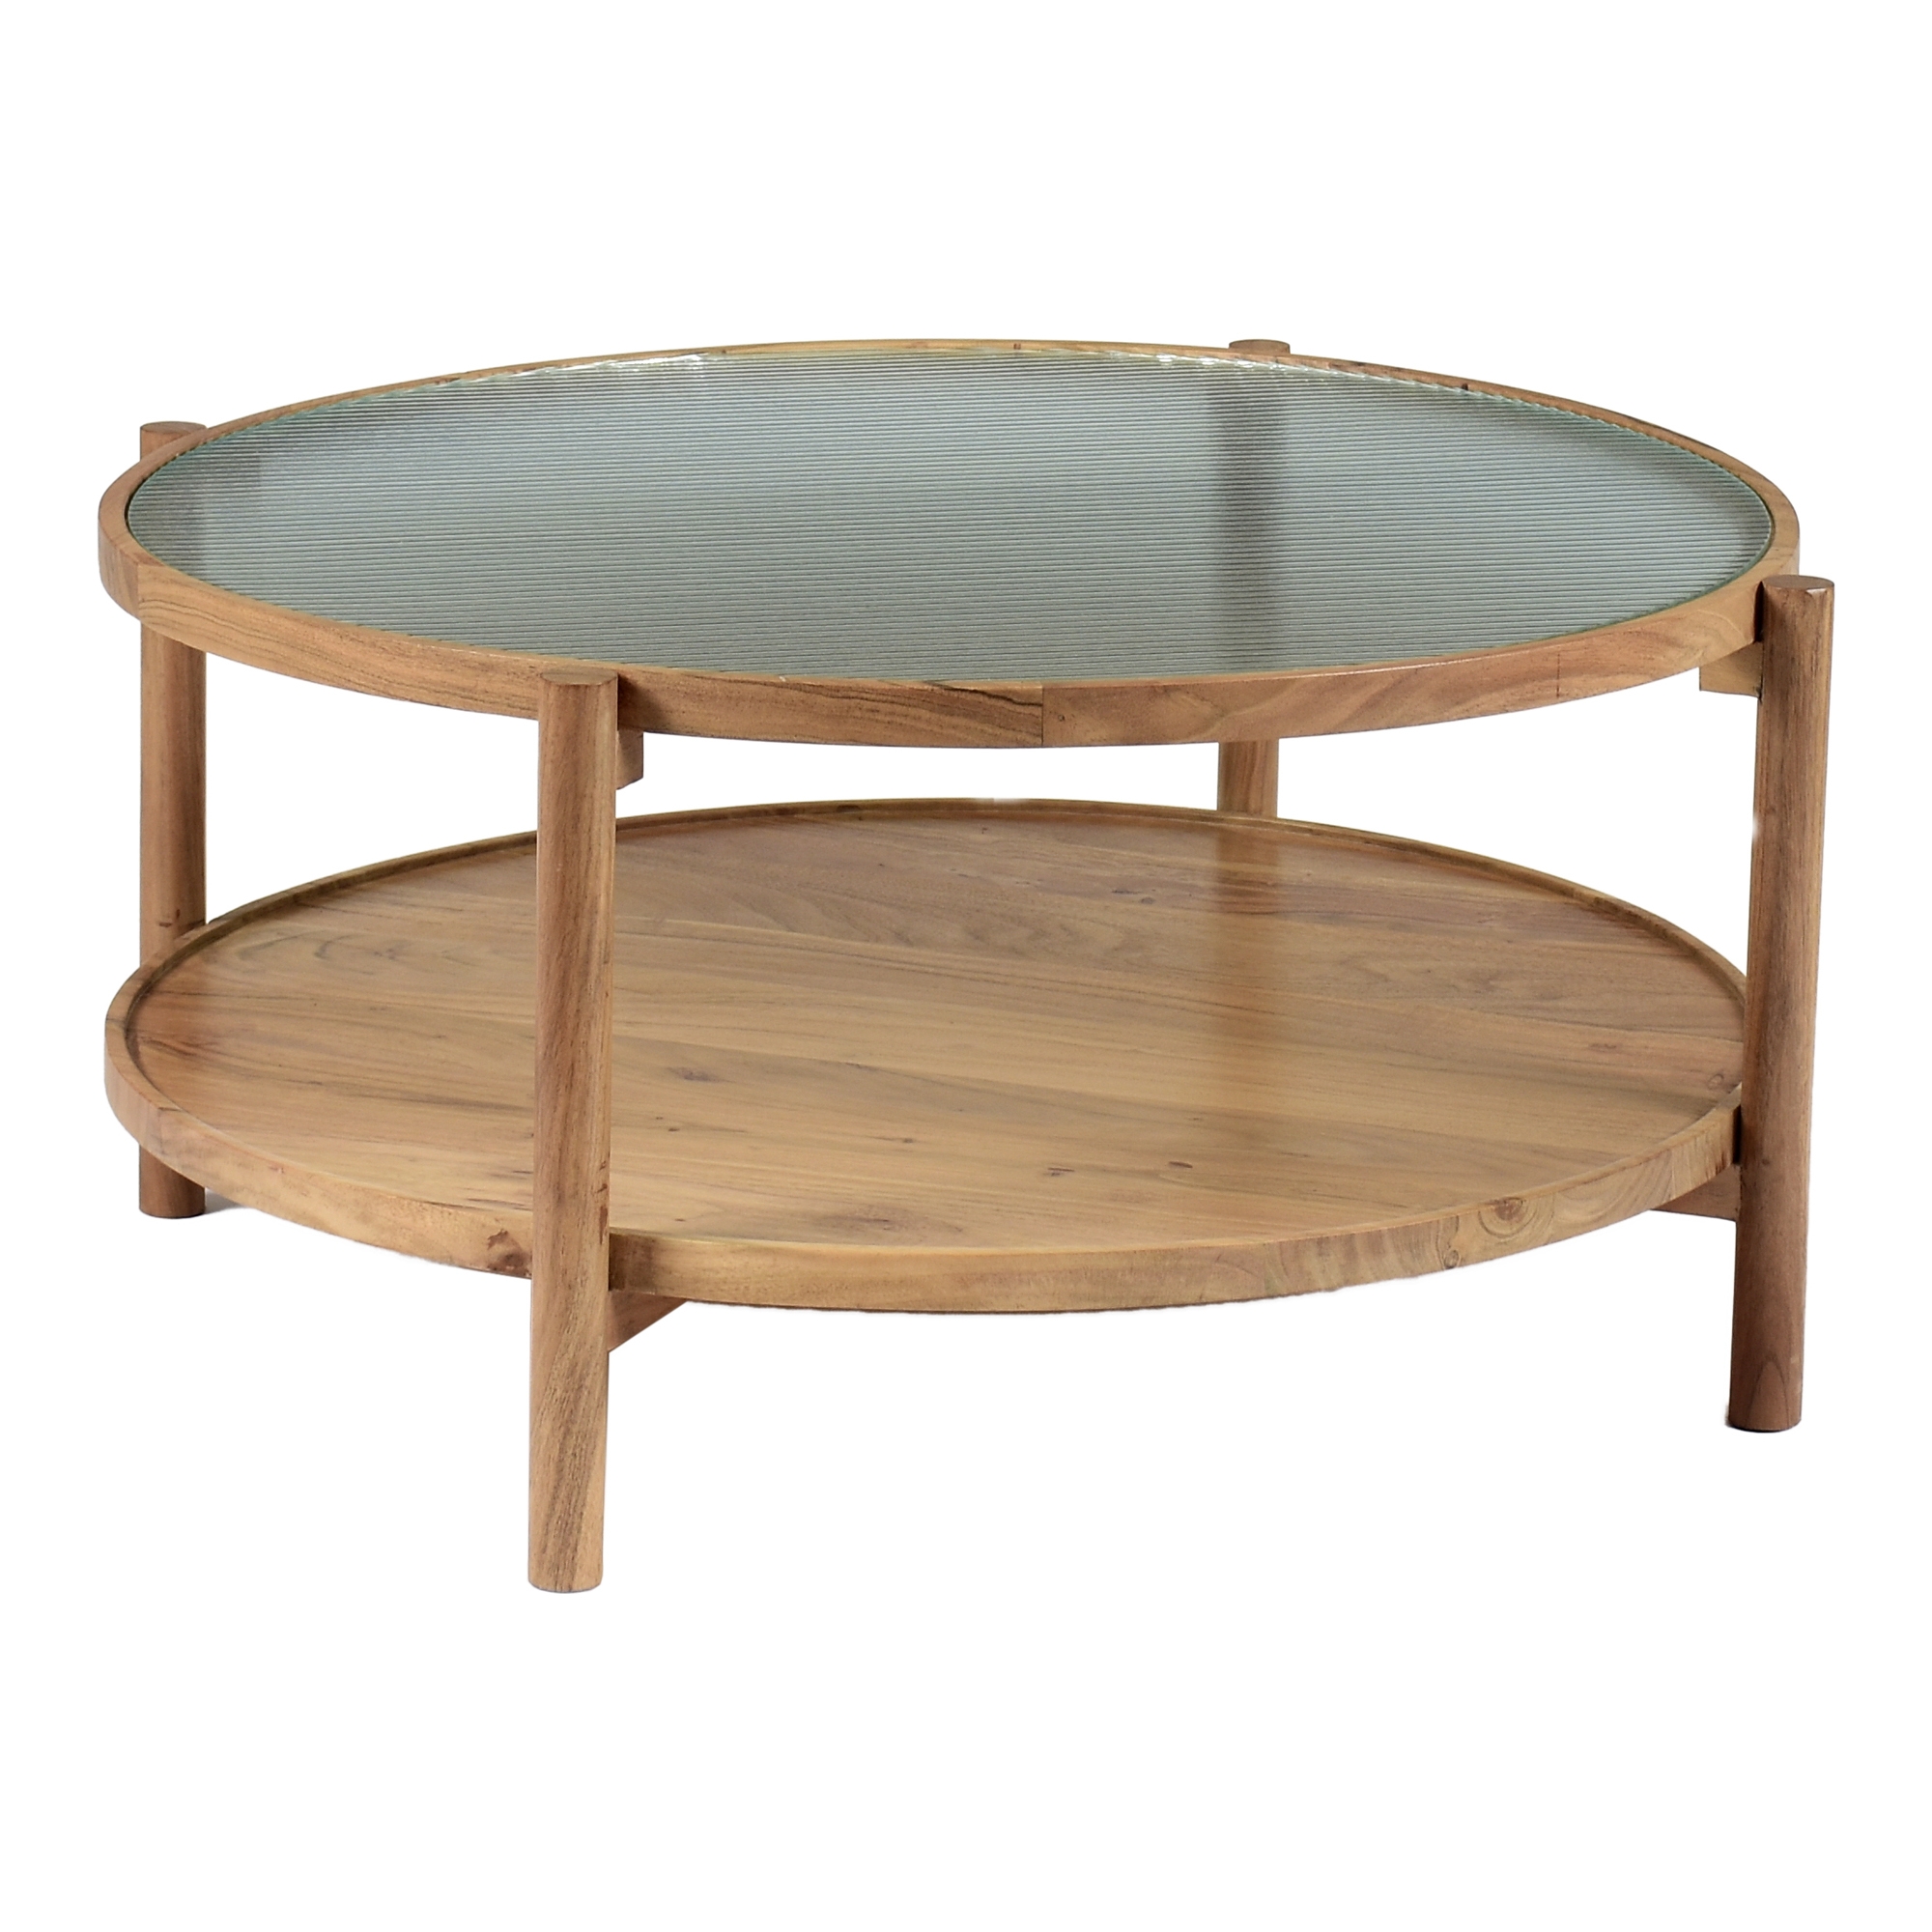 Denz Coffee Table - Image 1